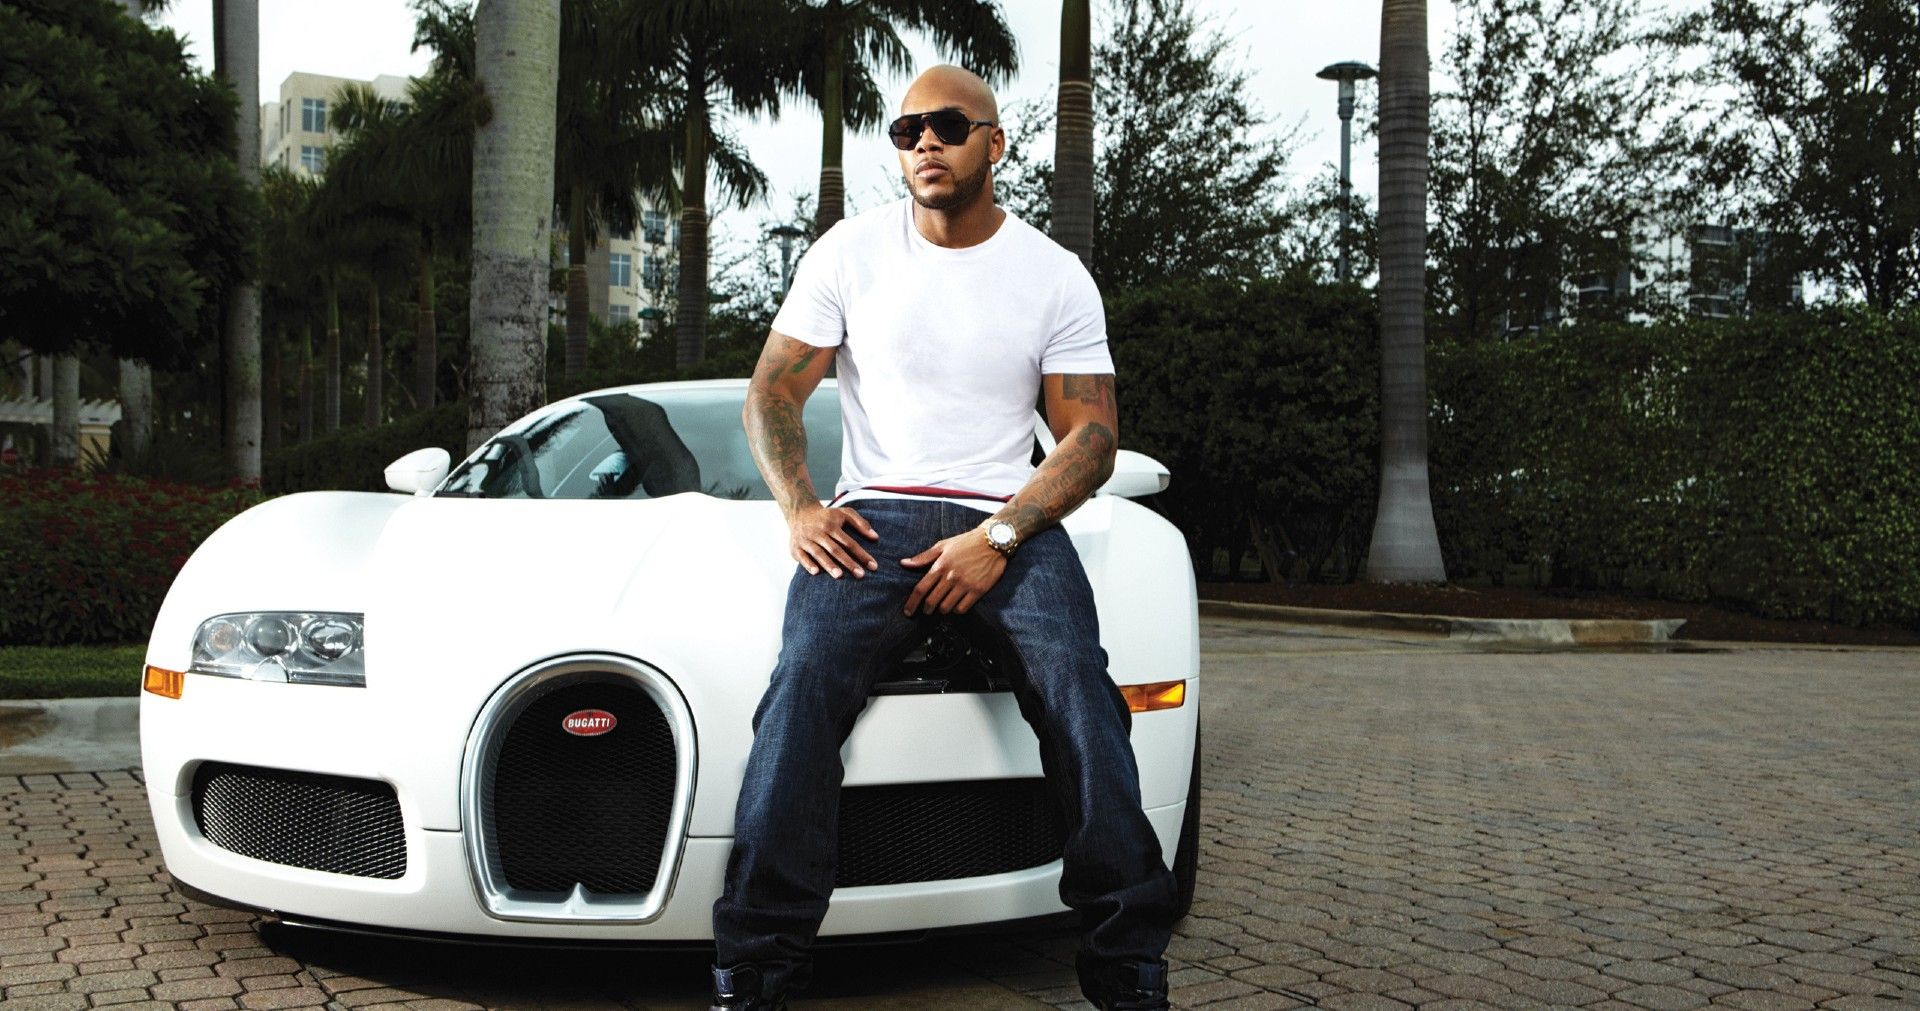 These Hip Hop Artist's Cars Make Everyone Else's Look Dull - Flipboard